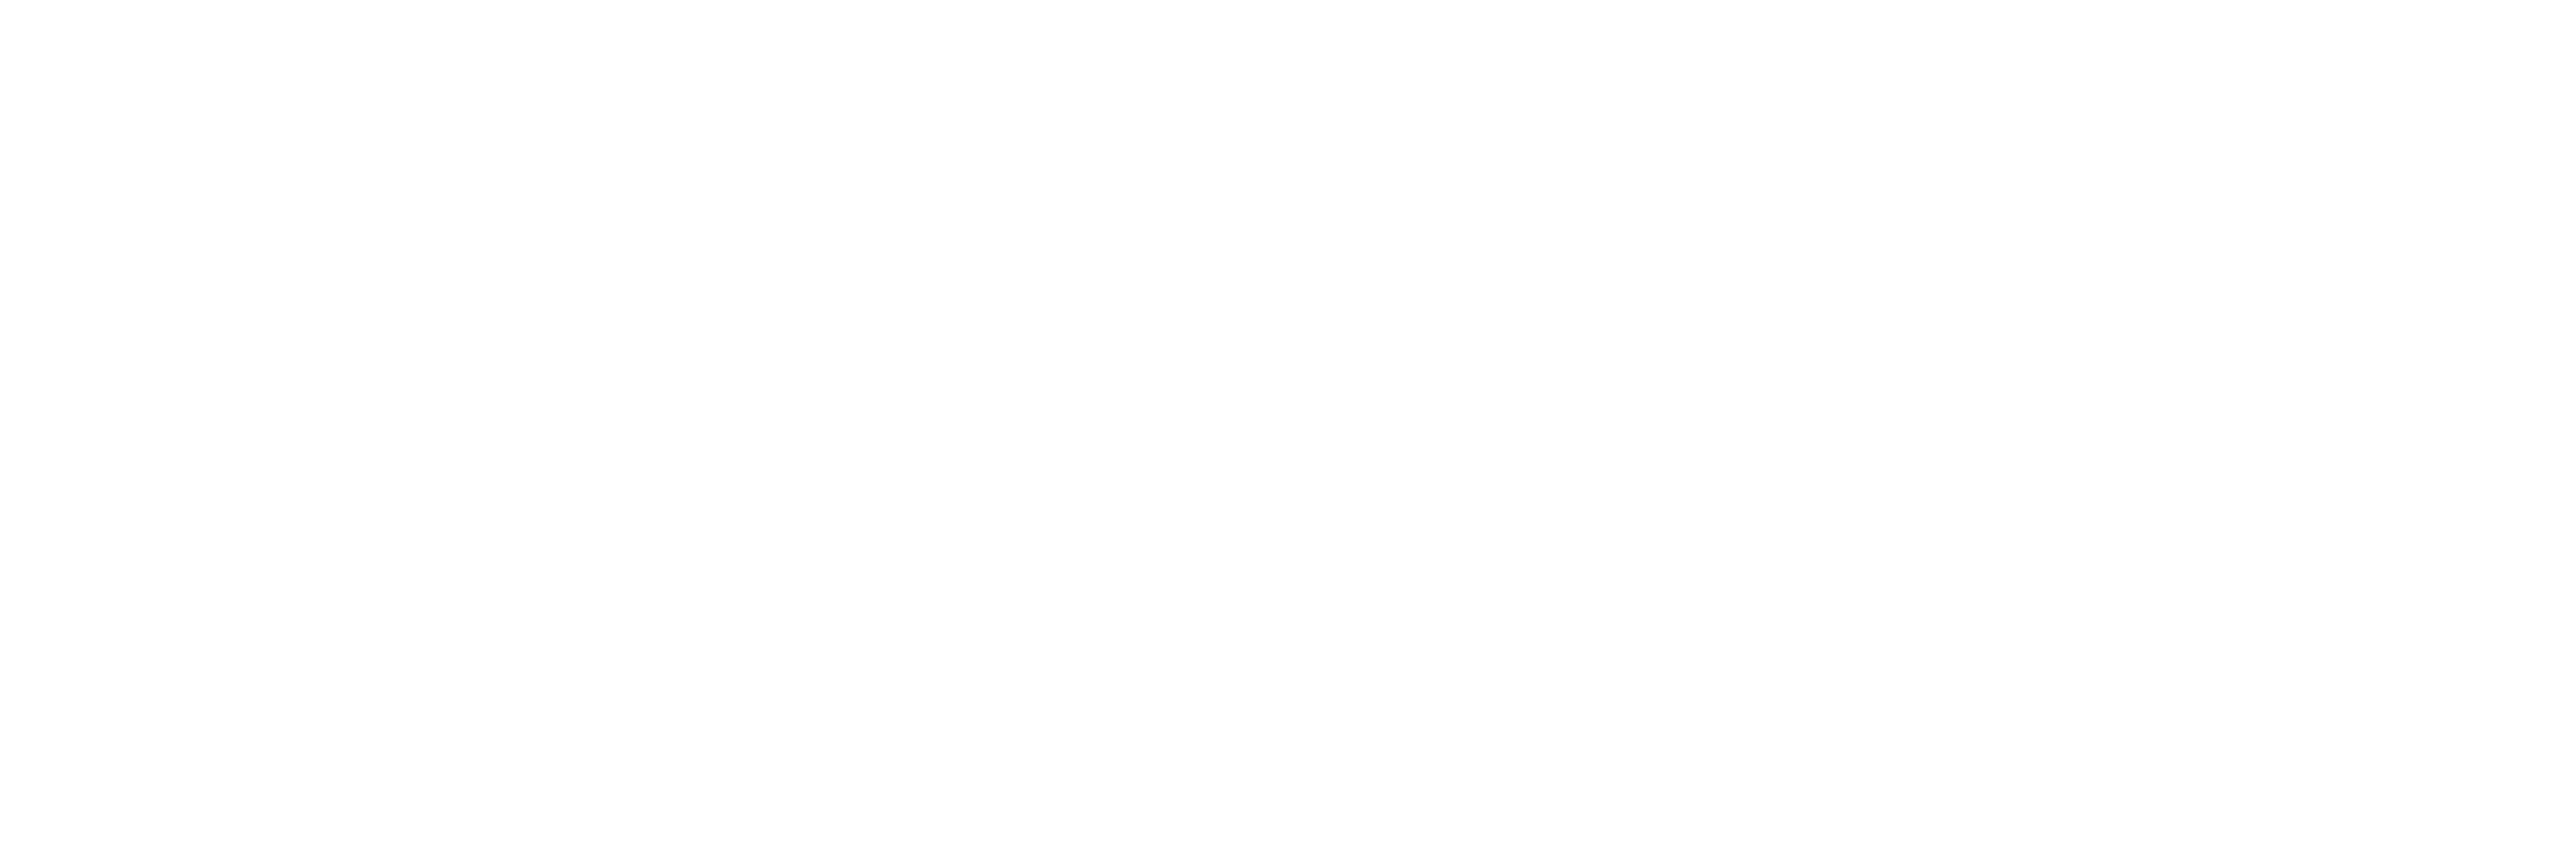 Junior Achievement of Middle Tennessee